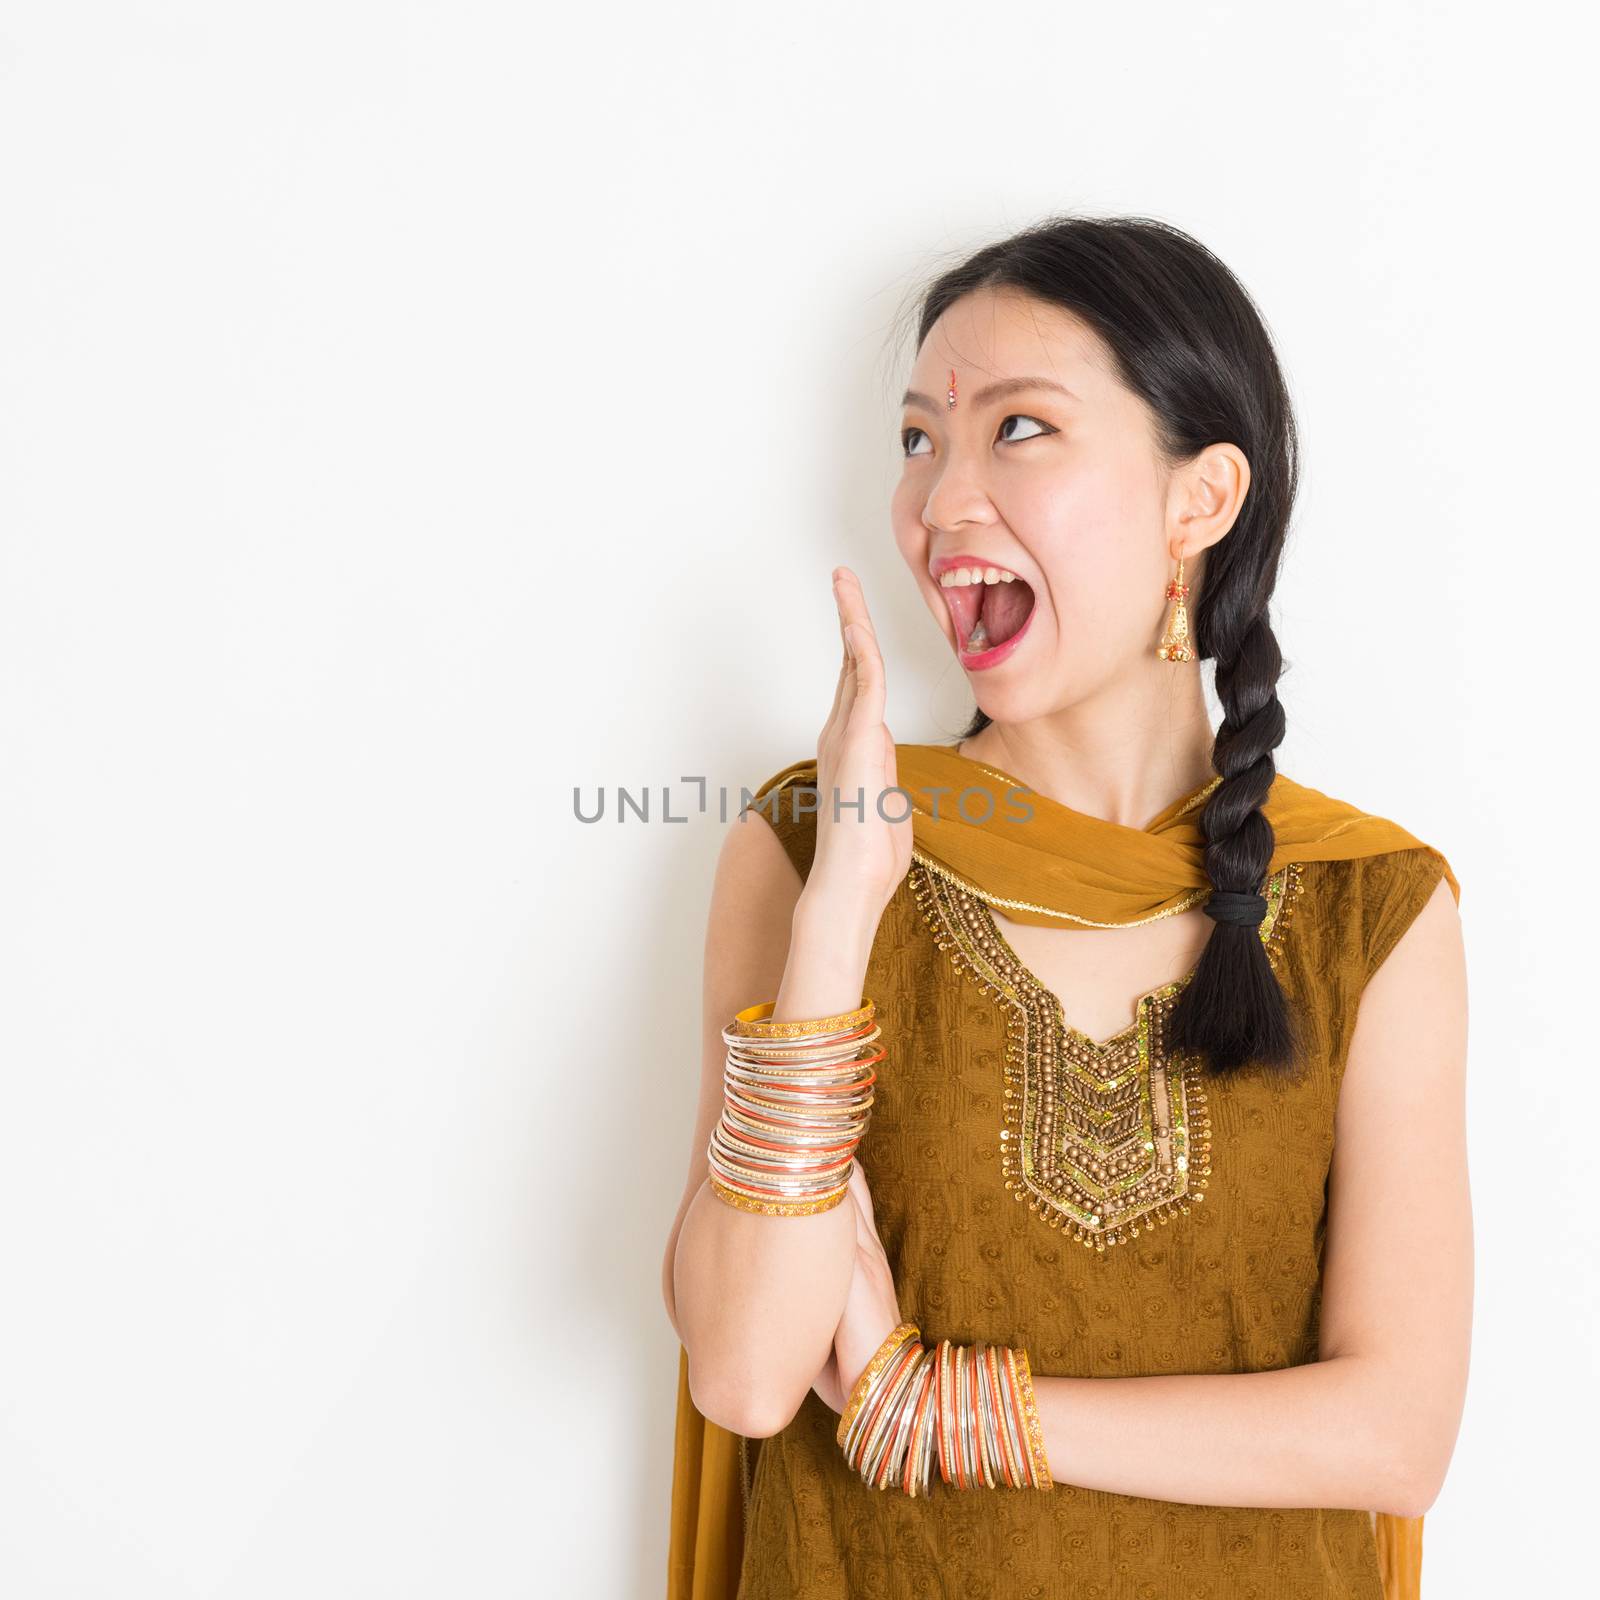 Portrait of shocked mixed race Indian Chinese woman in traditional punjabi dress opened mouth wide, surprised emotion, standing on plain white background.